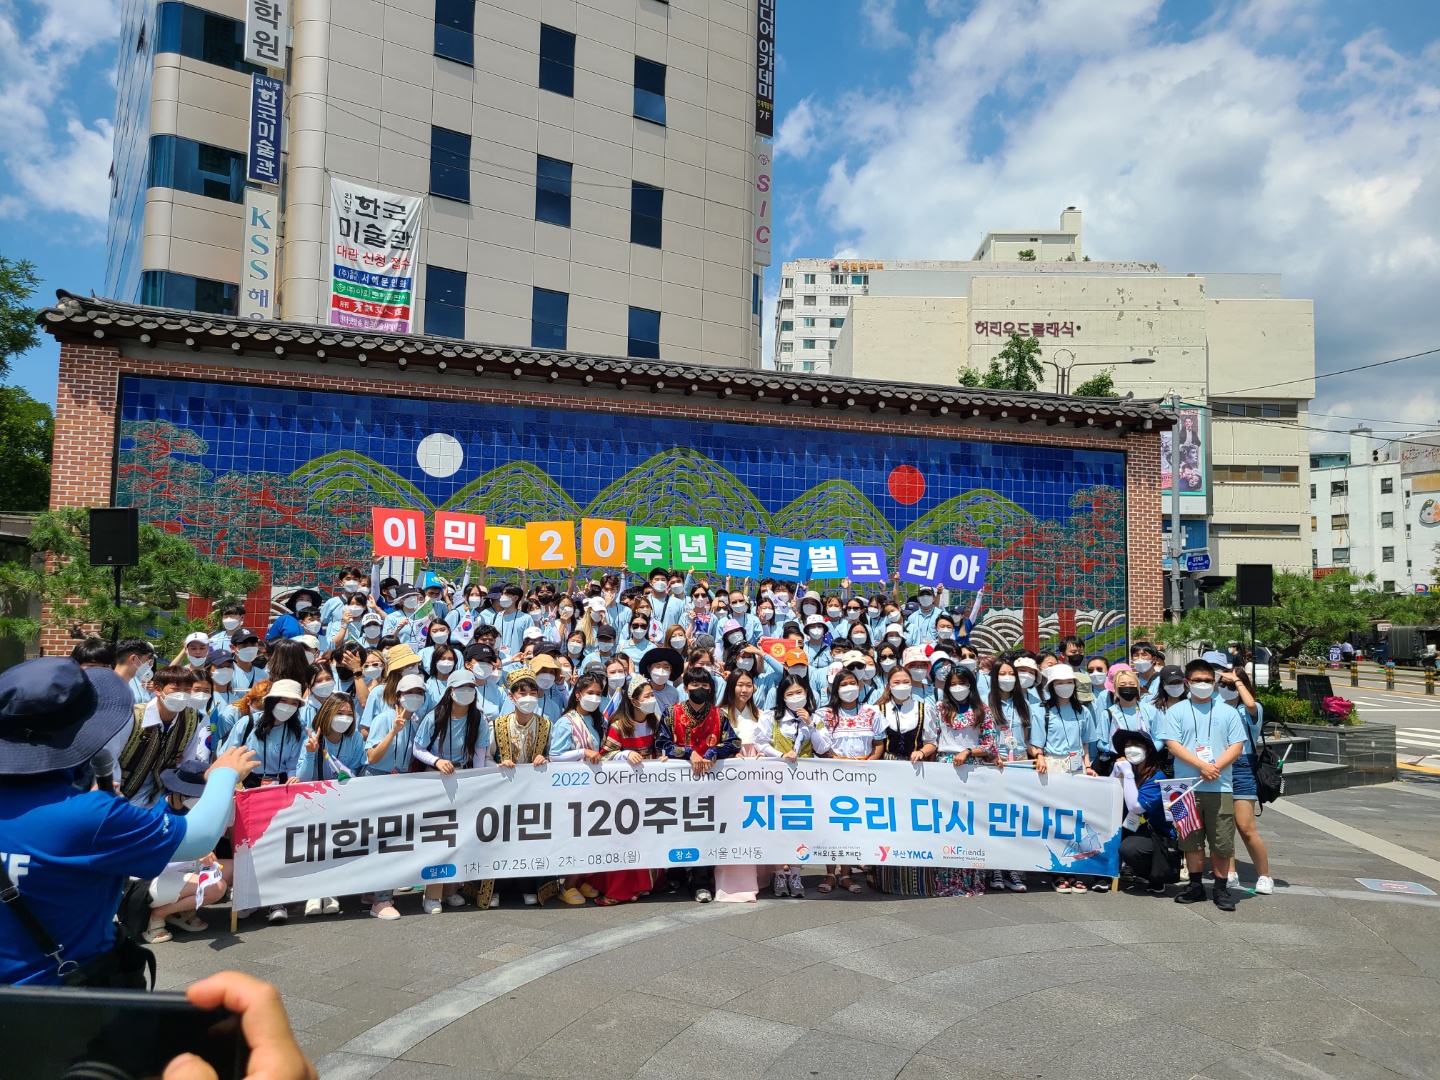 The 120th anniversary of Korean immigration in Insa-dong, Seoul